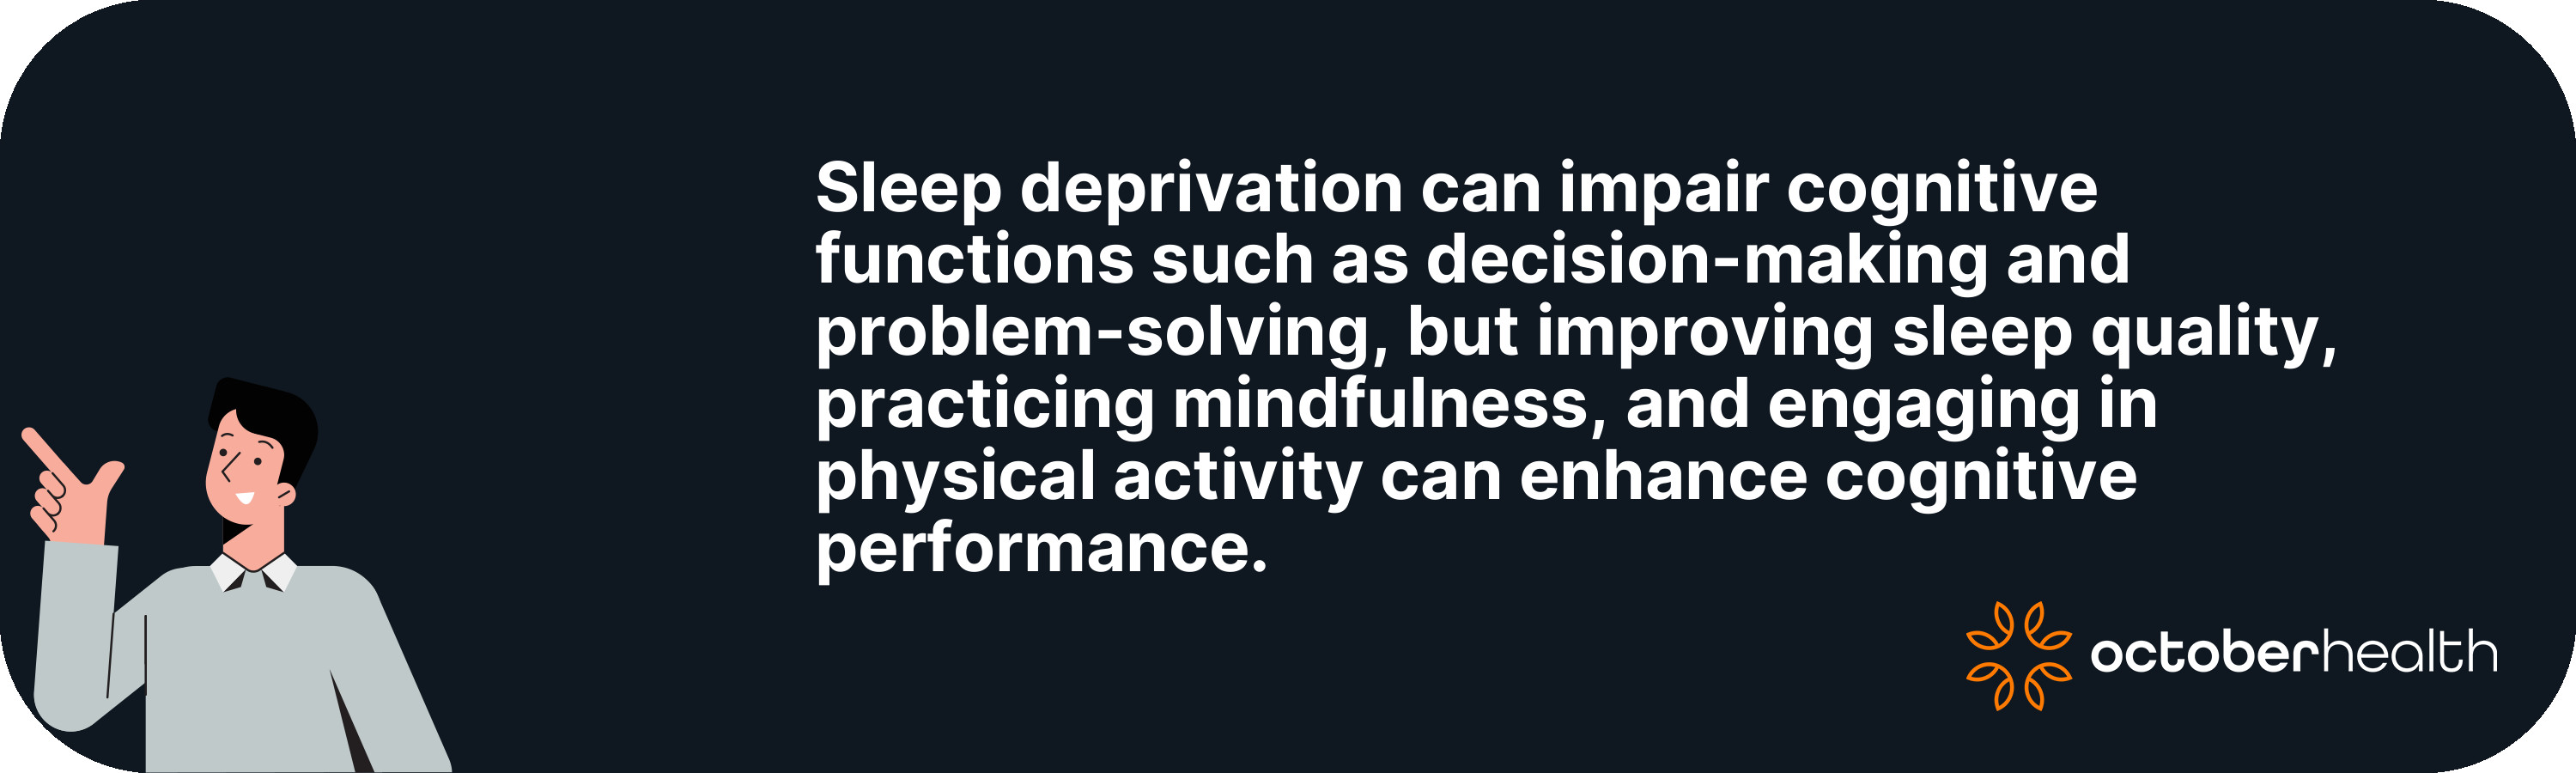 Sleep deprivation can impair cognitive functions...